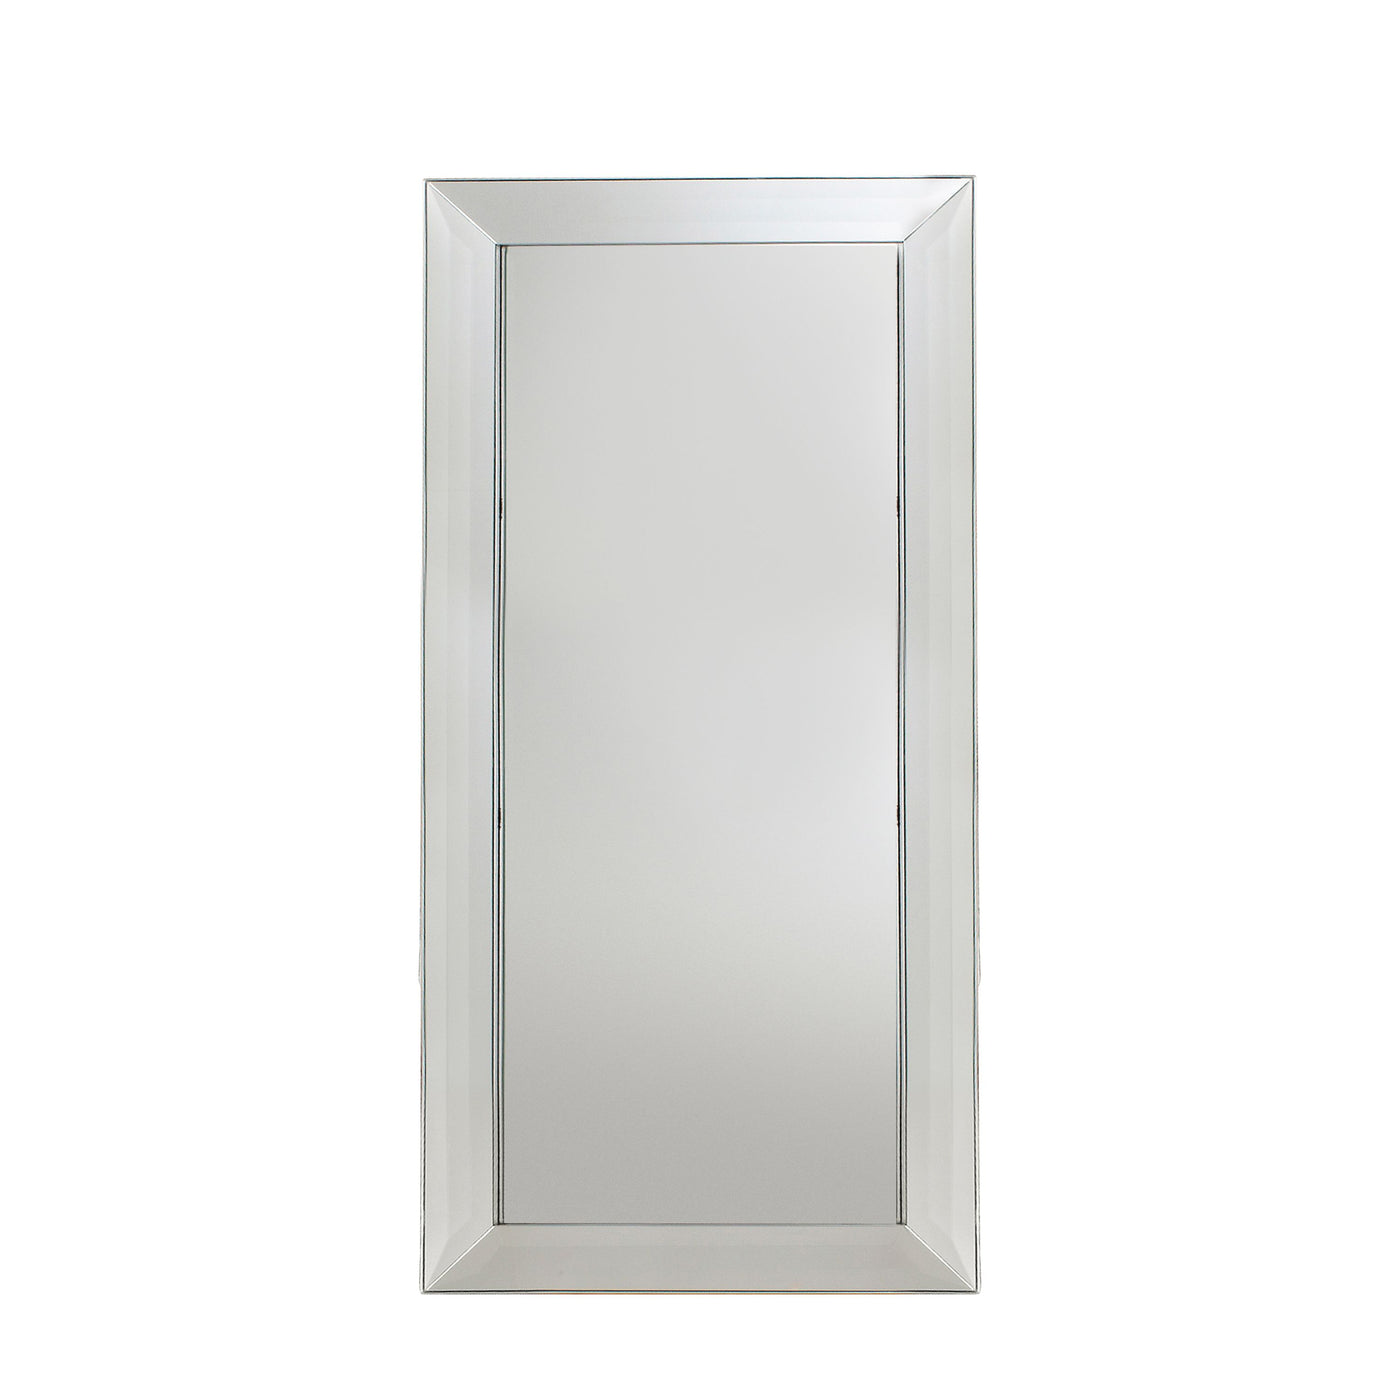 Dovenby Leaner Mirror 65" x 31"